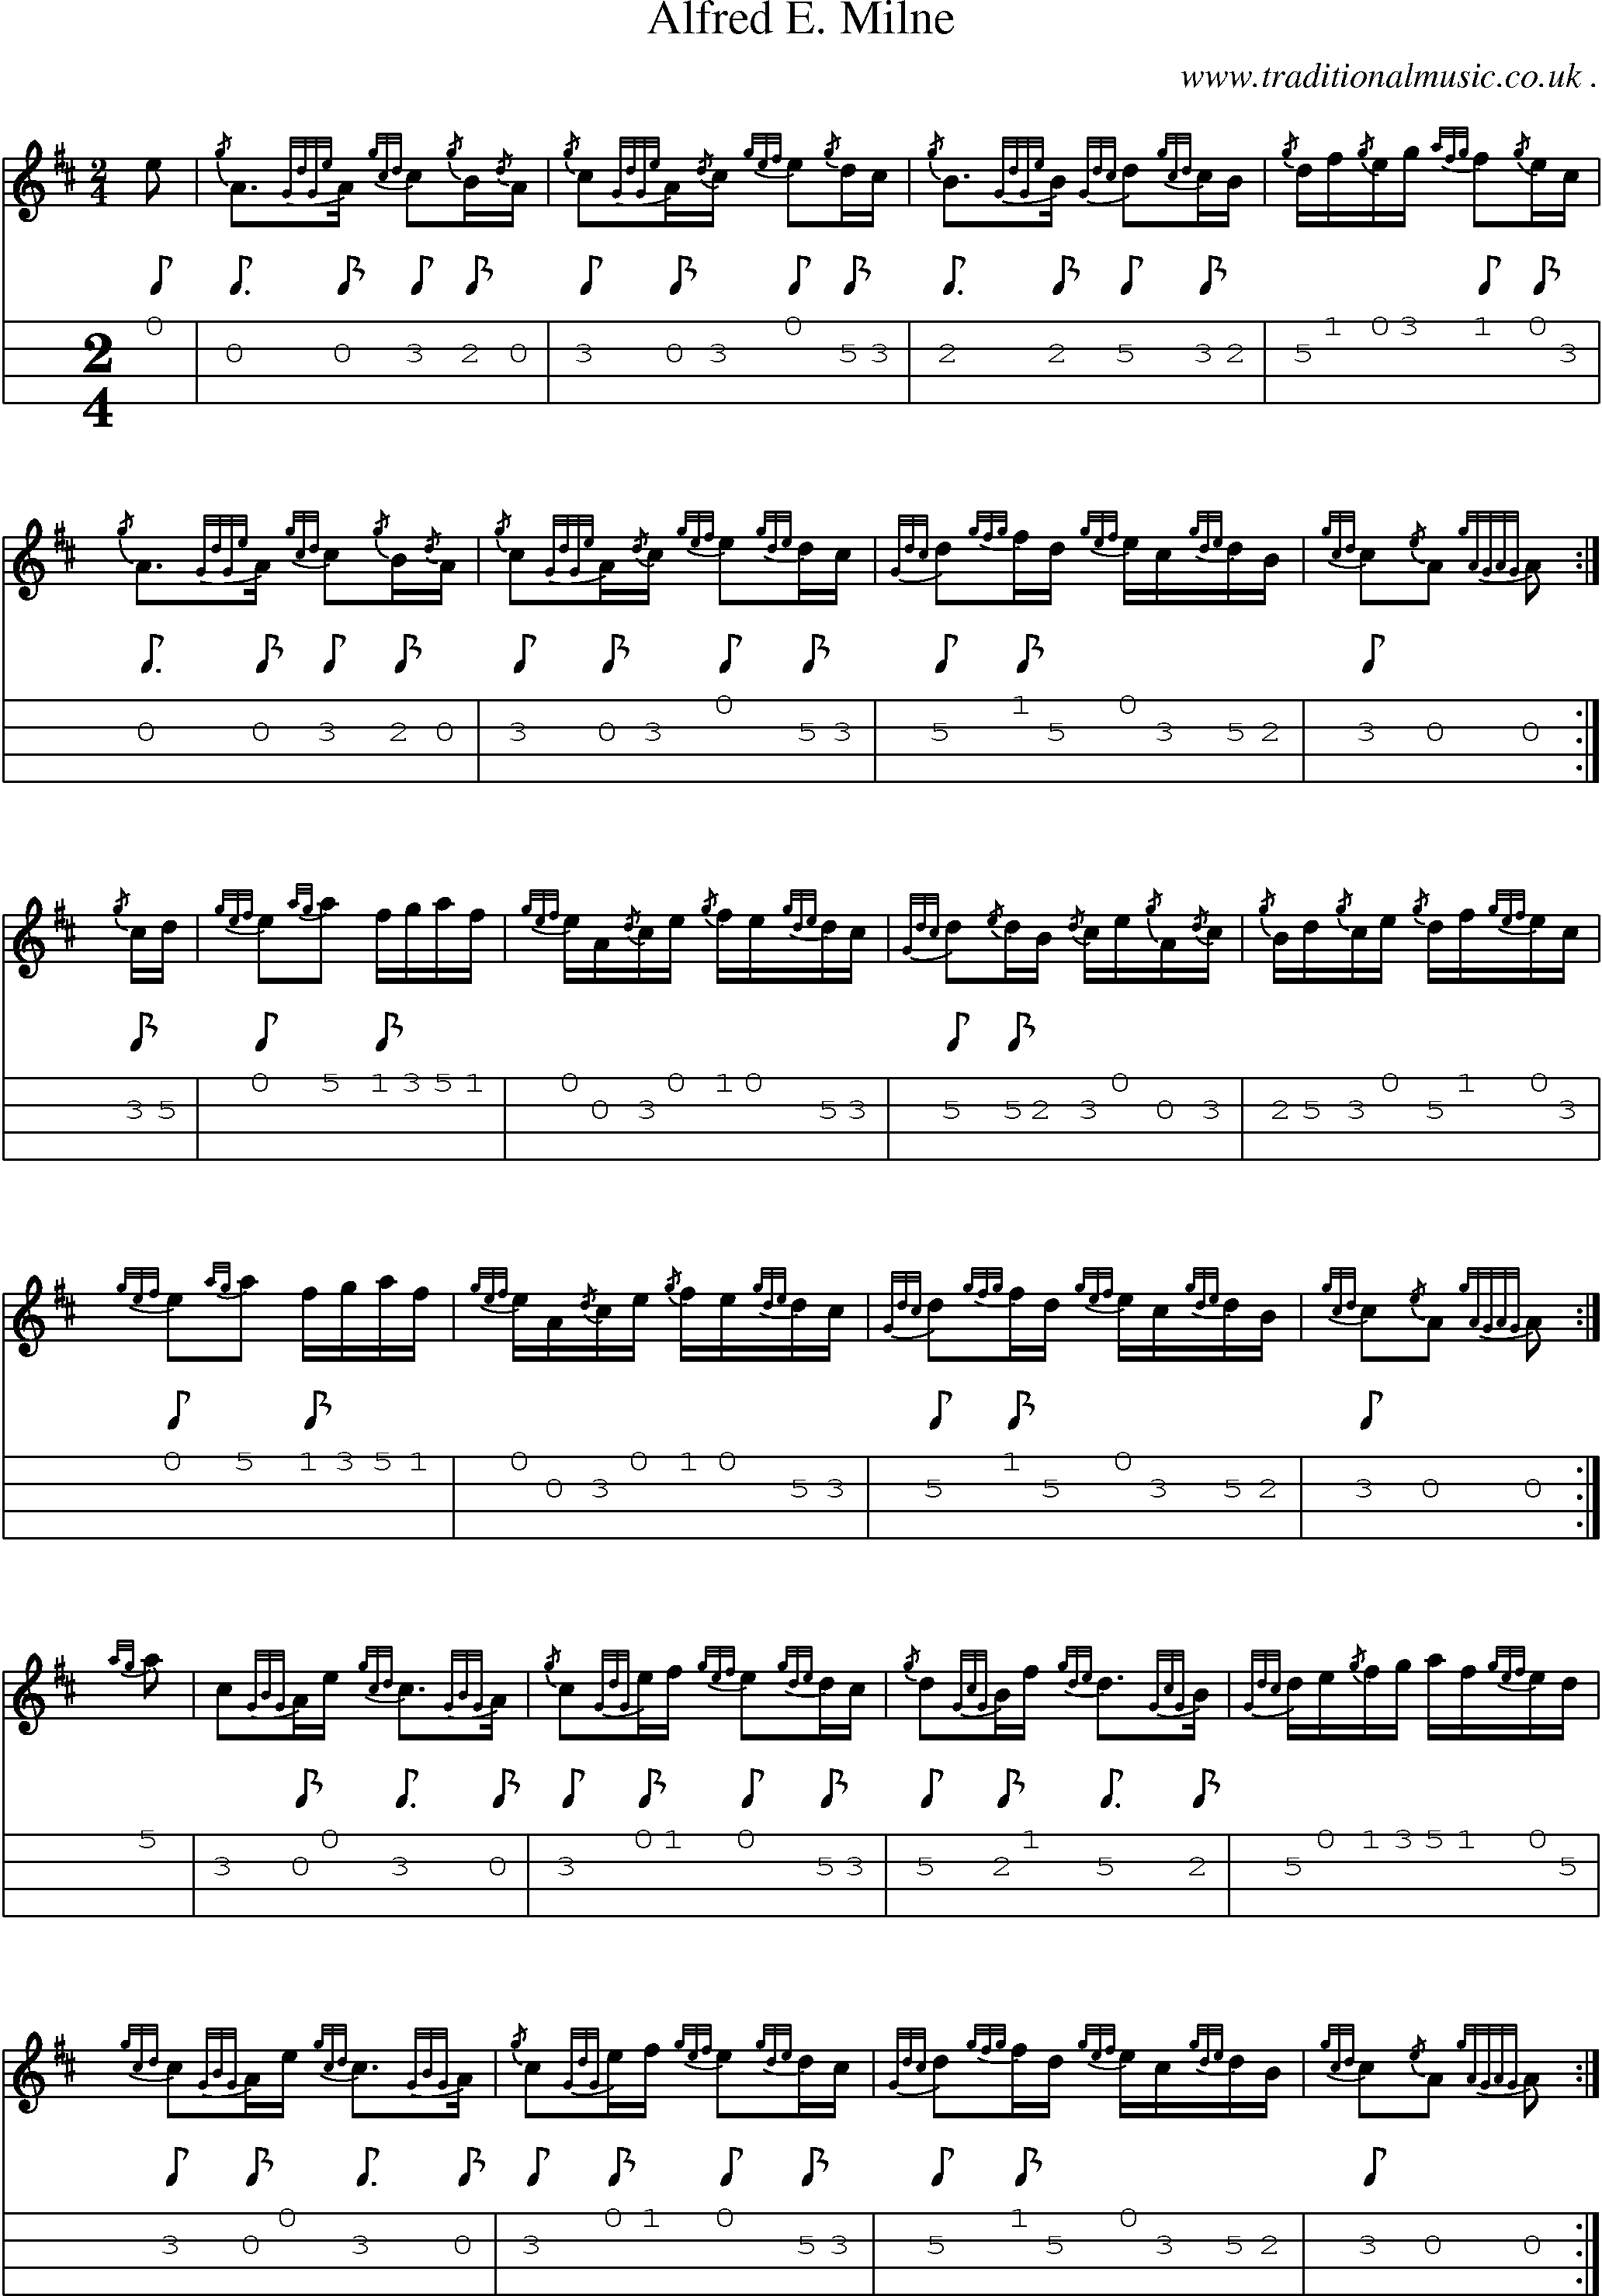 Sheet-music  score, Chords and Mandolin Tabs for Alfred E Milne